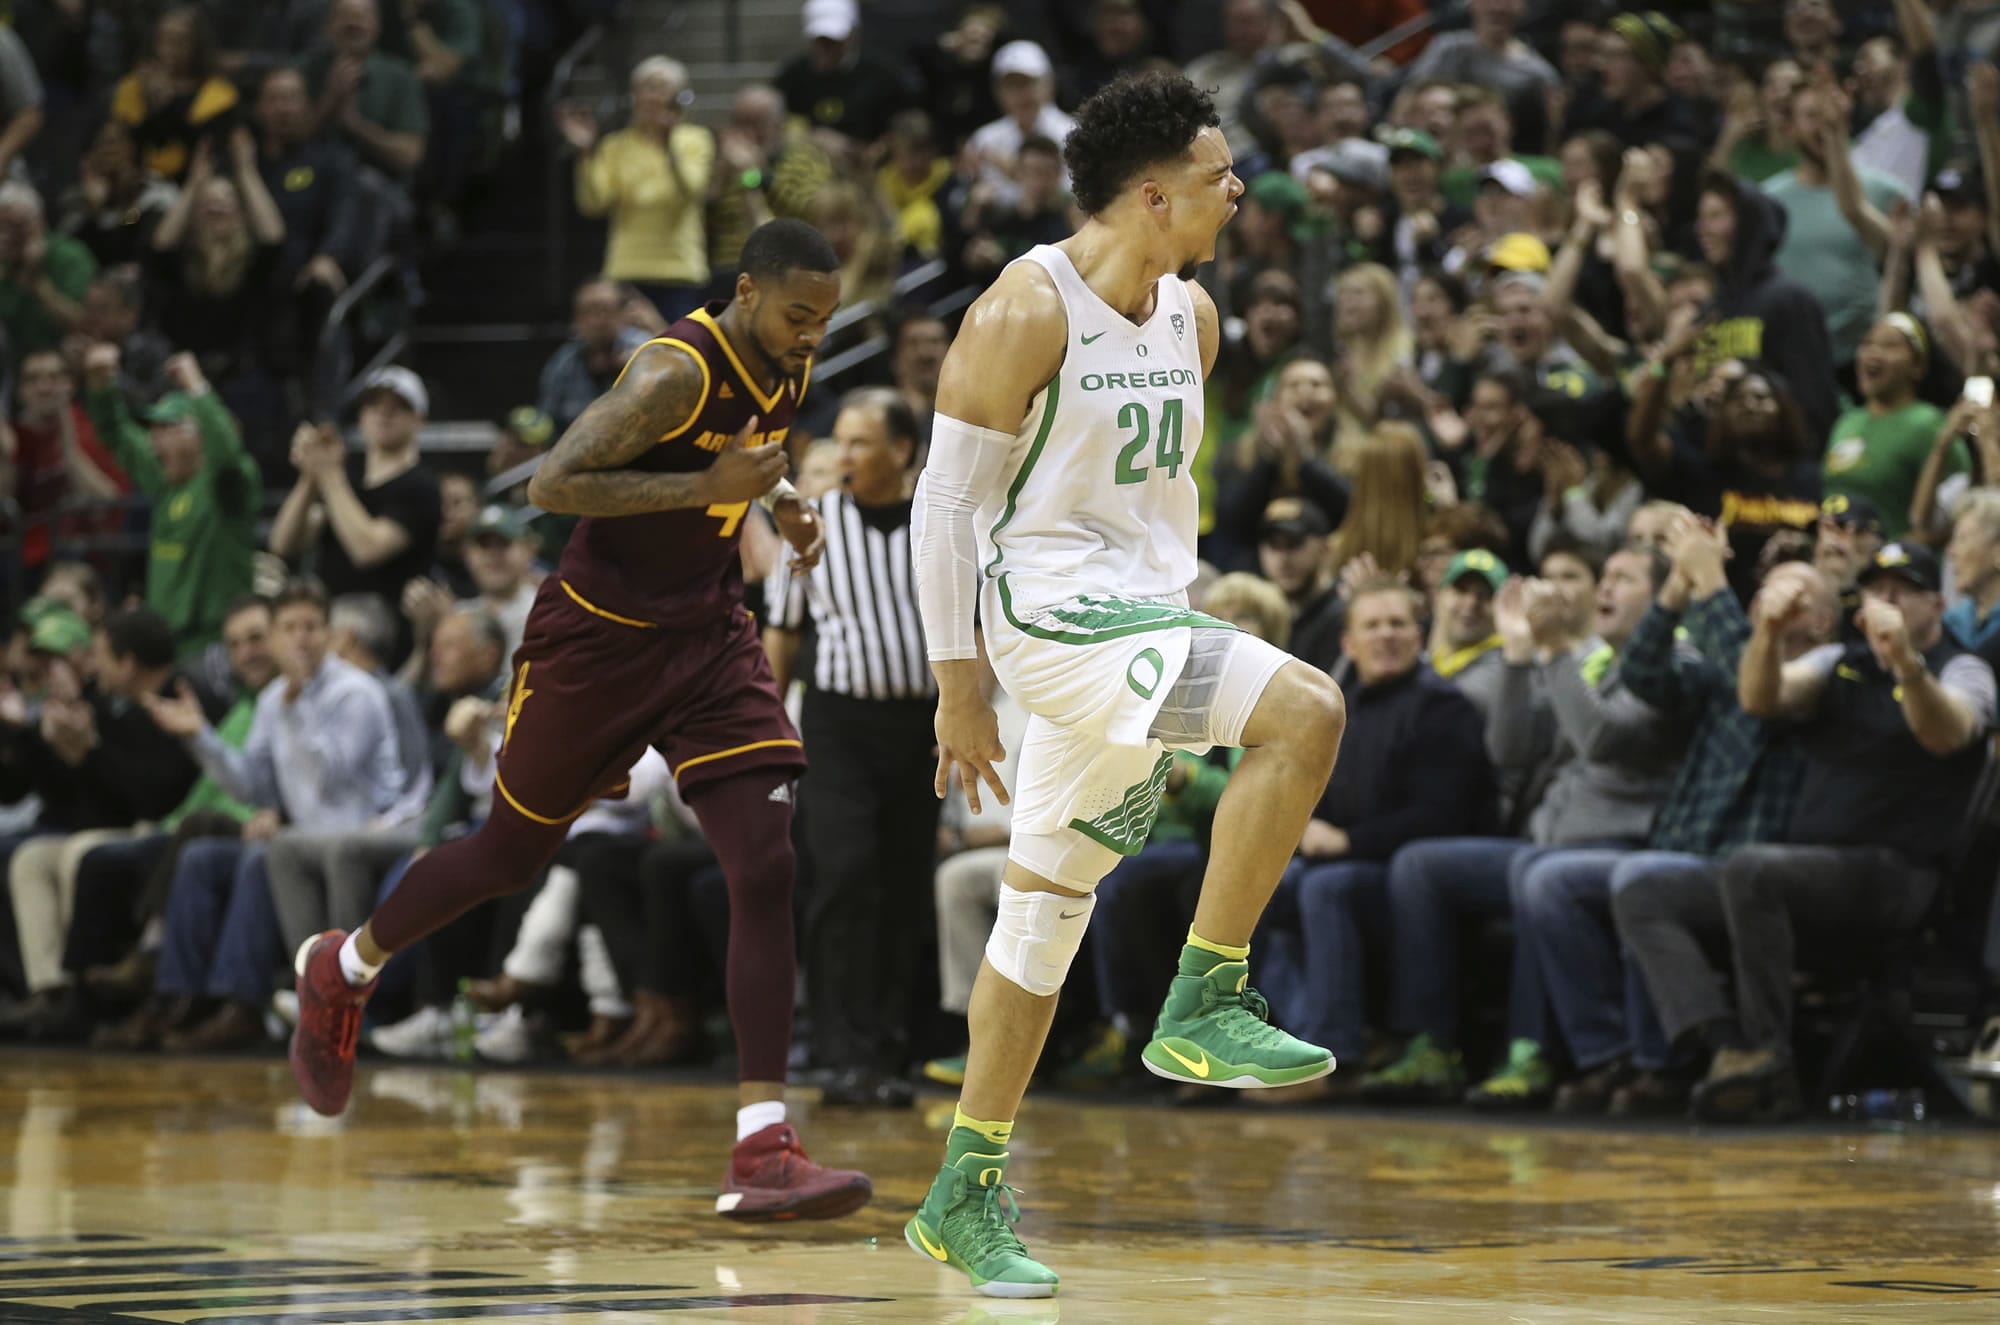 Oregon's Dillon Brooks, right, celebrates after shooting a 3-point shot in the closing minutes, as Arizona State's Torian Graham moves downcourt during an NCAA college basketball game Thursday, Feb. 2, 2017, in Eugene, Ore. Oregon won 71-70.